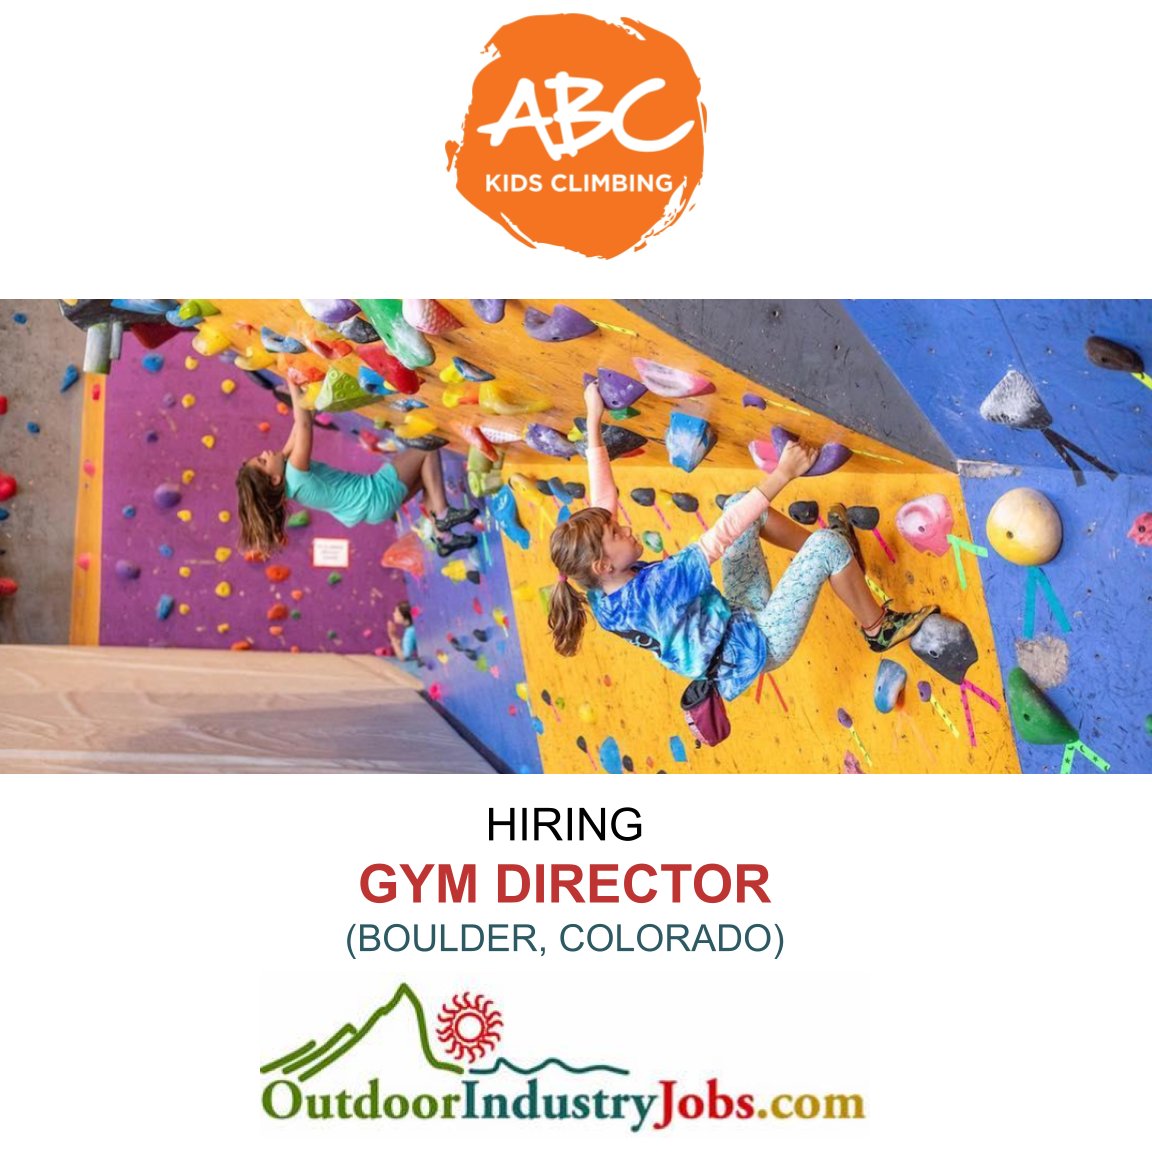 ABC is hiring a Gym Director in Boulder, Colorado. Apply Here:
outdoorindustryjobs.com/JobDetail/GetJ…

#outdoorindustryjobs #abcclimbing #gymdirector #climbinglife #gymmanagement #gymmanager #climbingcoach #climbingcoaching #learntoclimb #bouldercolorado #boulderclimbing #facilitiesmanager